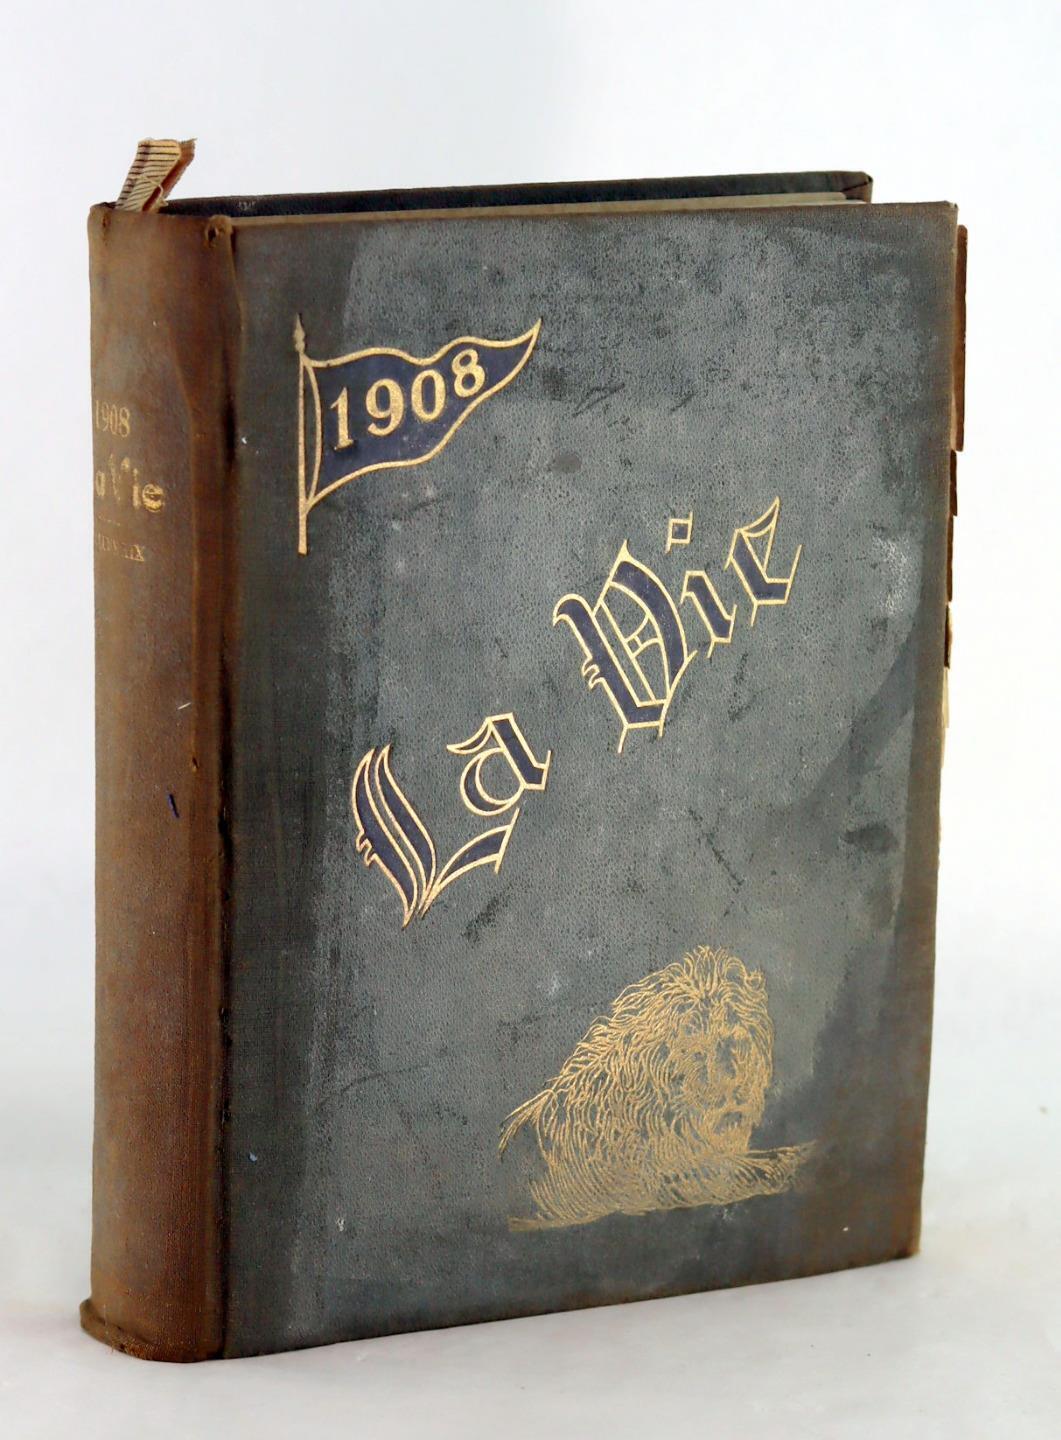 1908 La Vie Yearbook for the Pennsylvania State College Penn State University